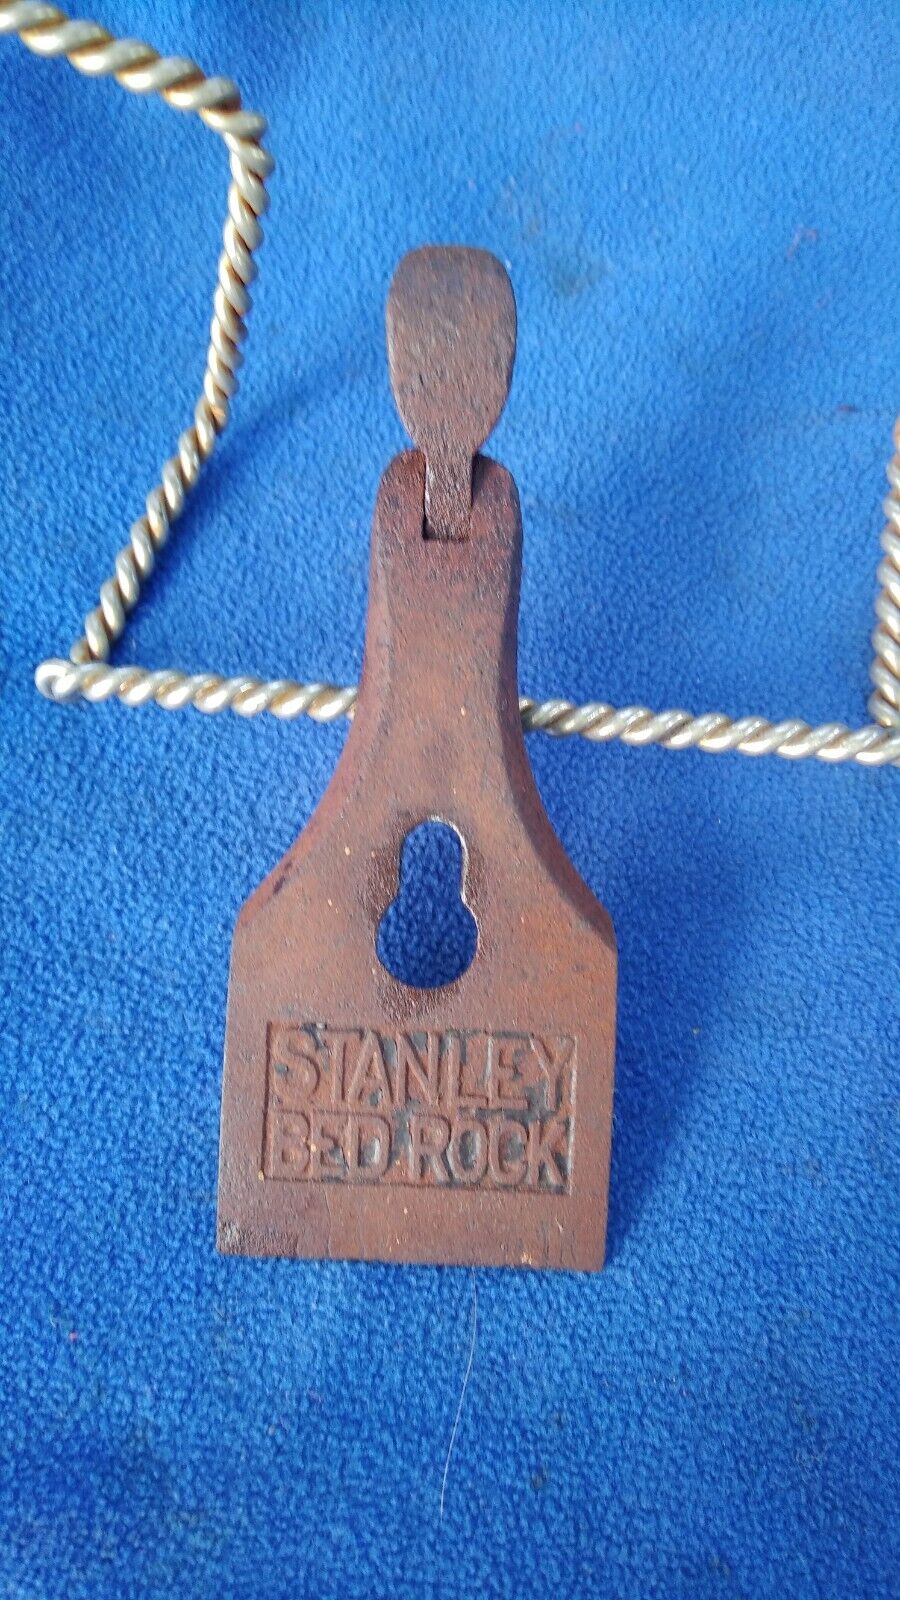 VINTAGE STANLEY  BEDROCK  WOOD PLANE B MODEL NO 605 USED PARTS ONLY AS IS PATD 1